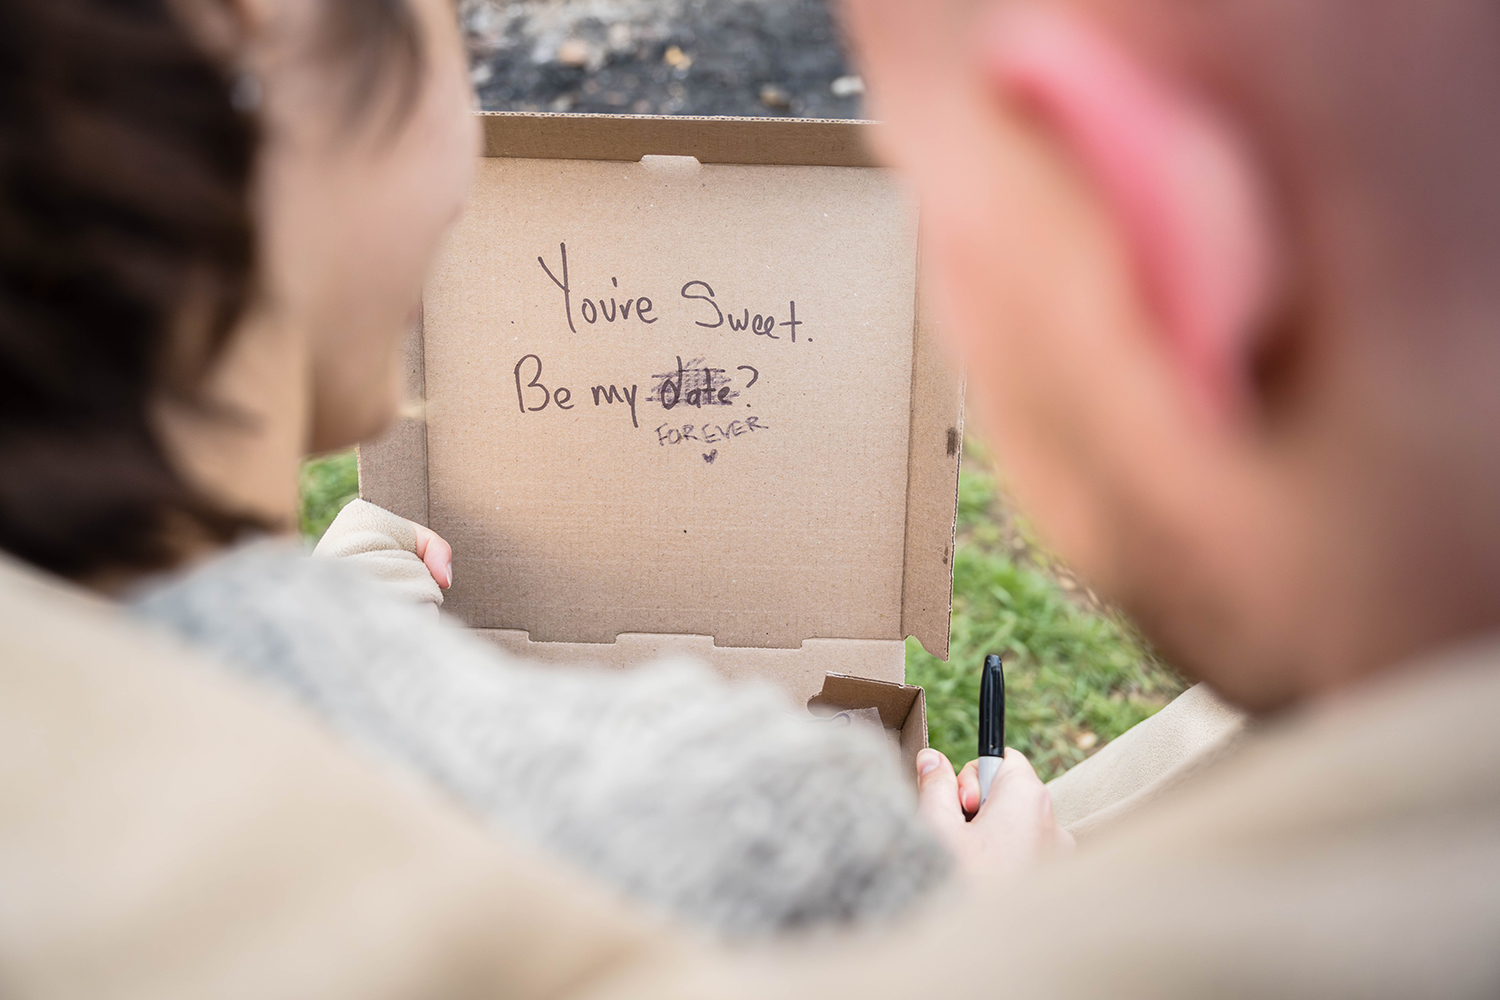 A couple cuddles together under a blanket outside of Rising Silo Brewery holding a box of cookies. On the inside of the box, someone has written "you're sweet. be my date?" with the word "date" scribbled out and replaced with the word "forever" with a little heart.